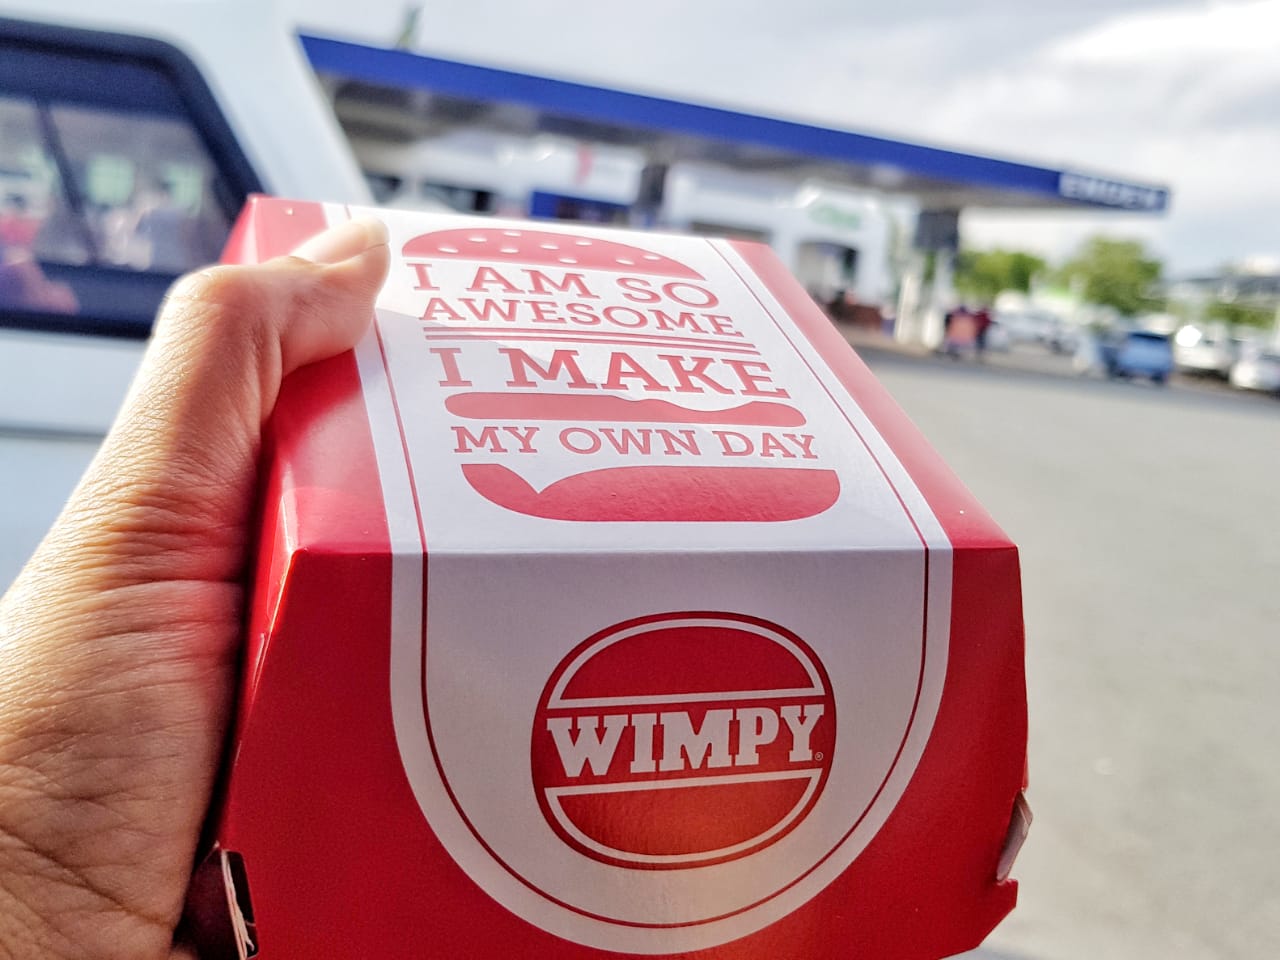 25 YEARS FOR THAT?! Wimpy Burger #wimpy 